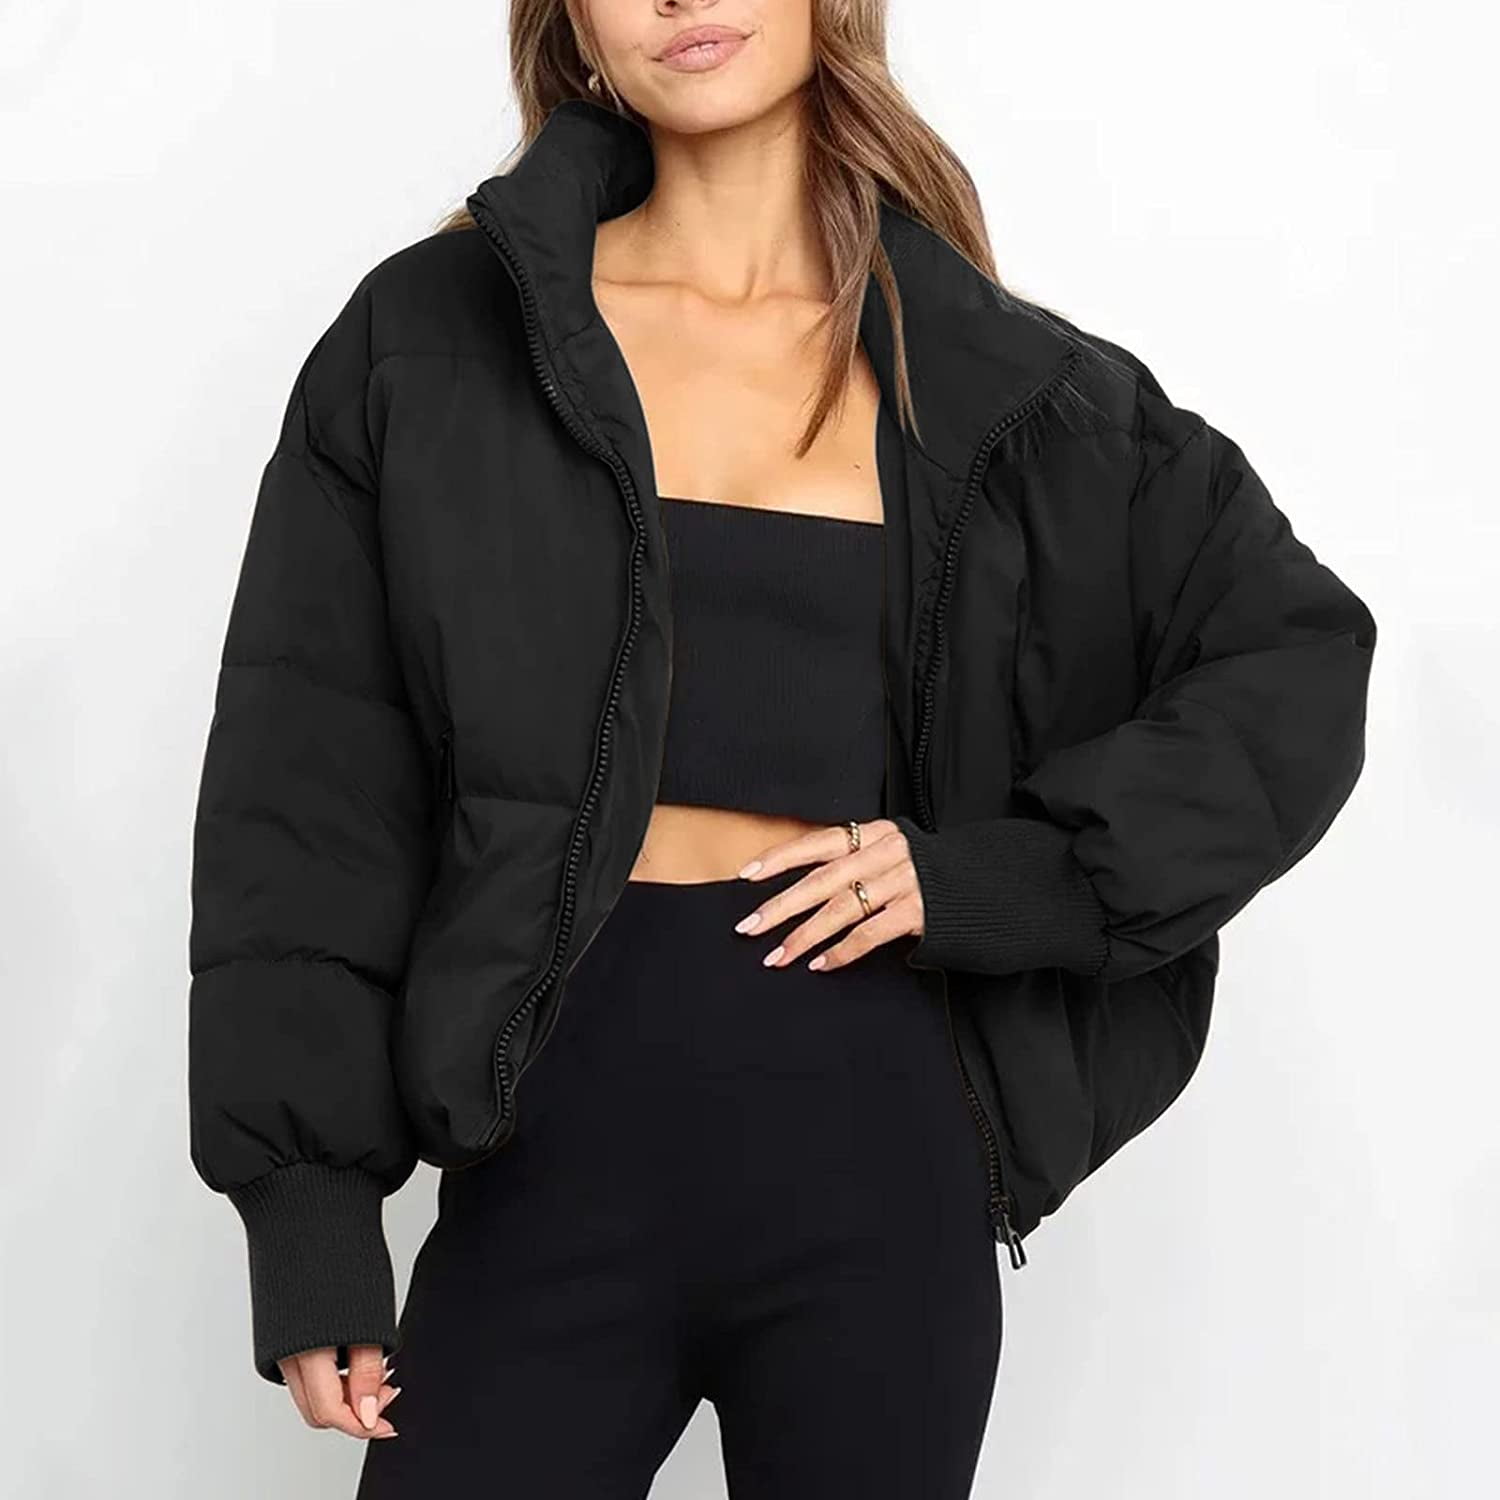 Black Peach Skin Cropped Bubble Puffer Jacket, 47% OFF